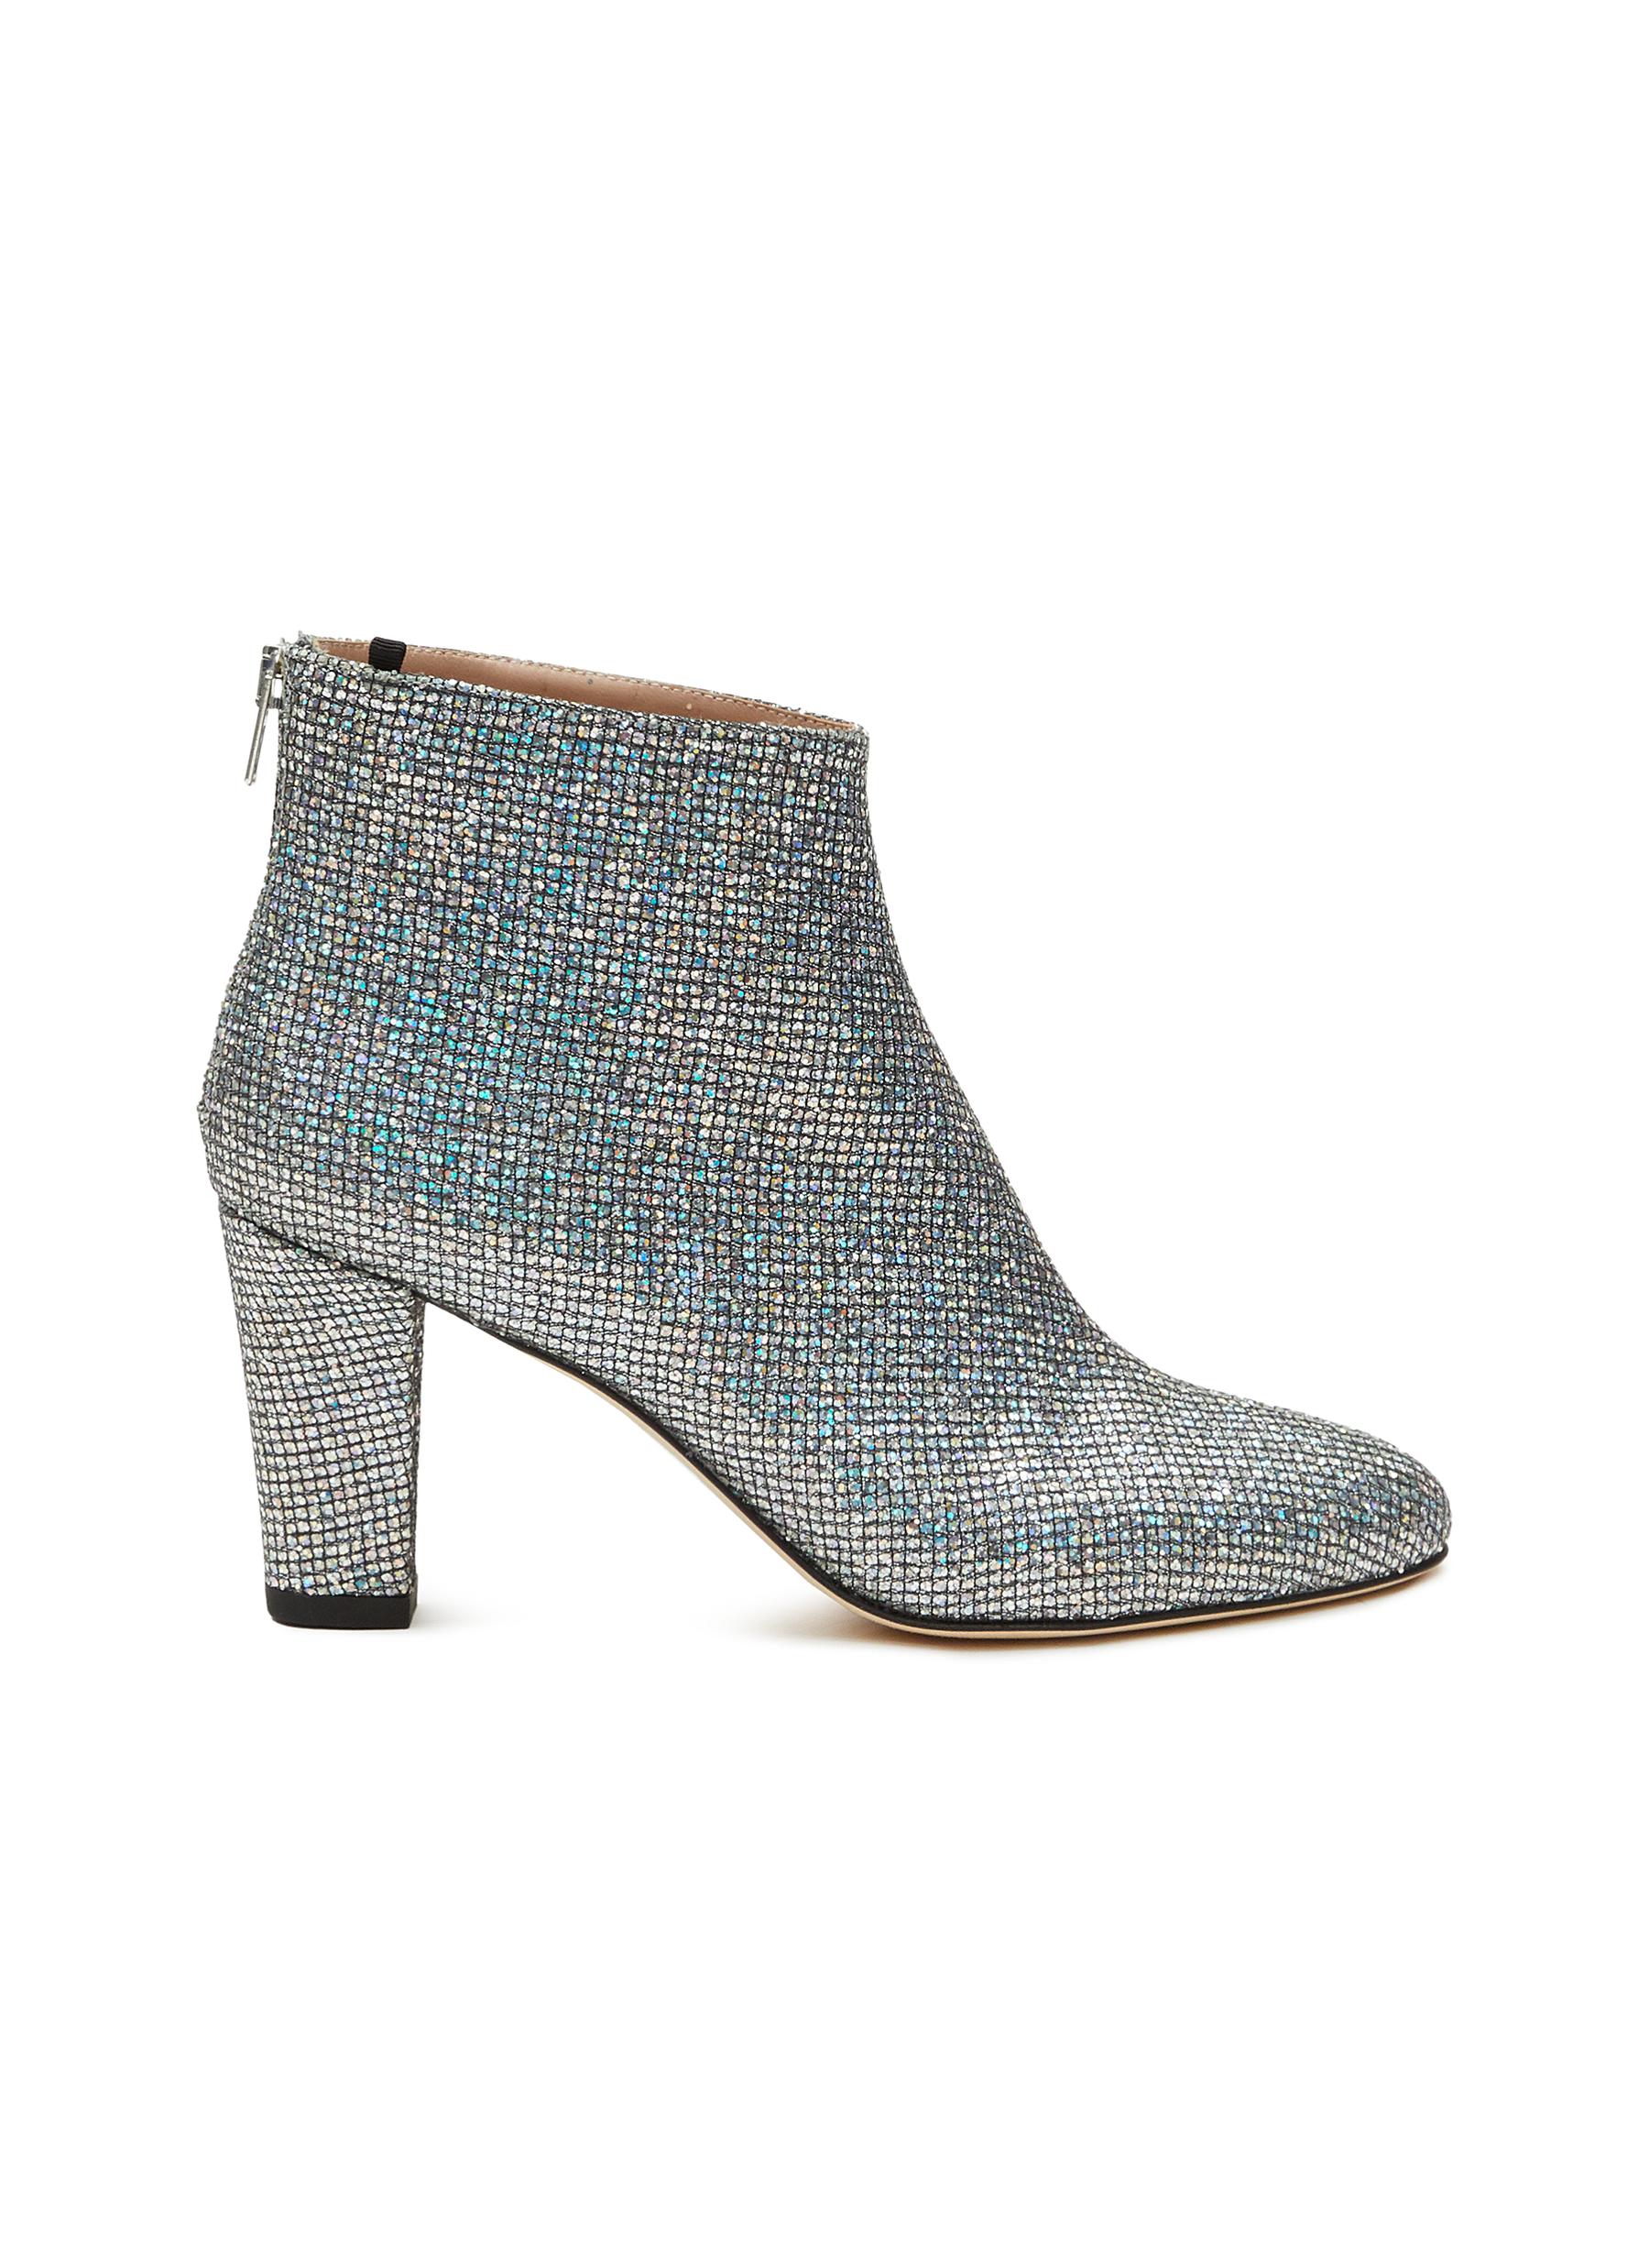 'Minnie' 75 Glittered Mesh Ankle Boots